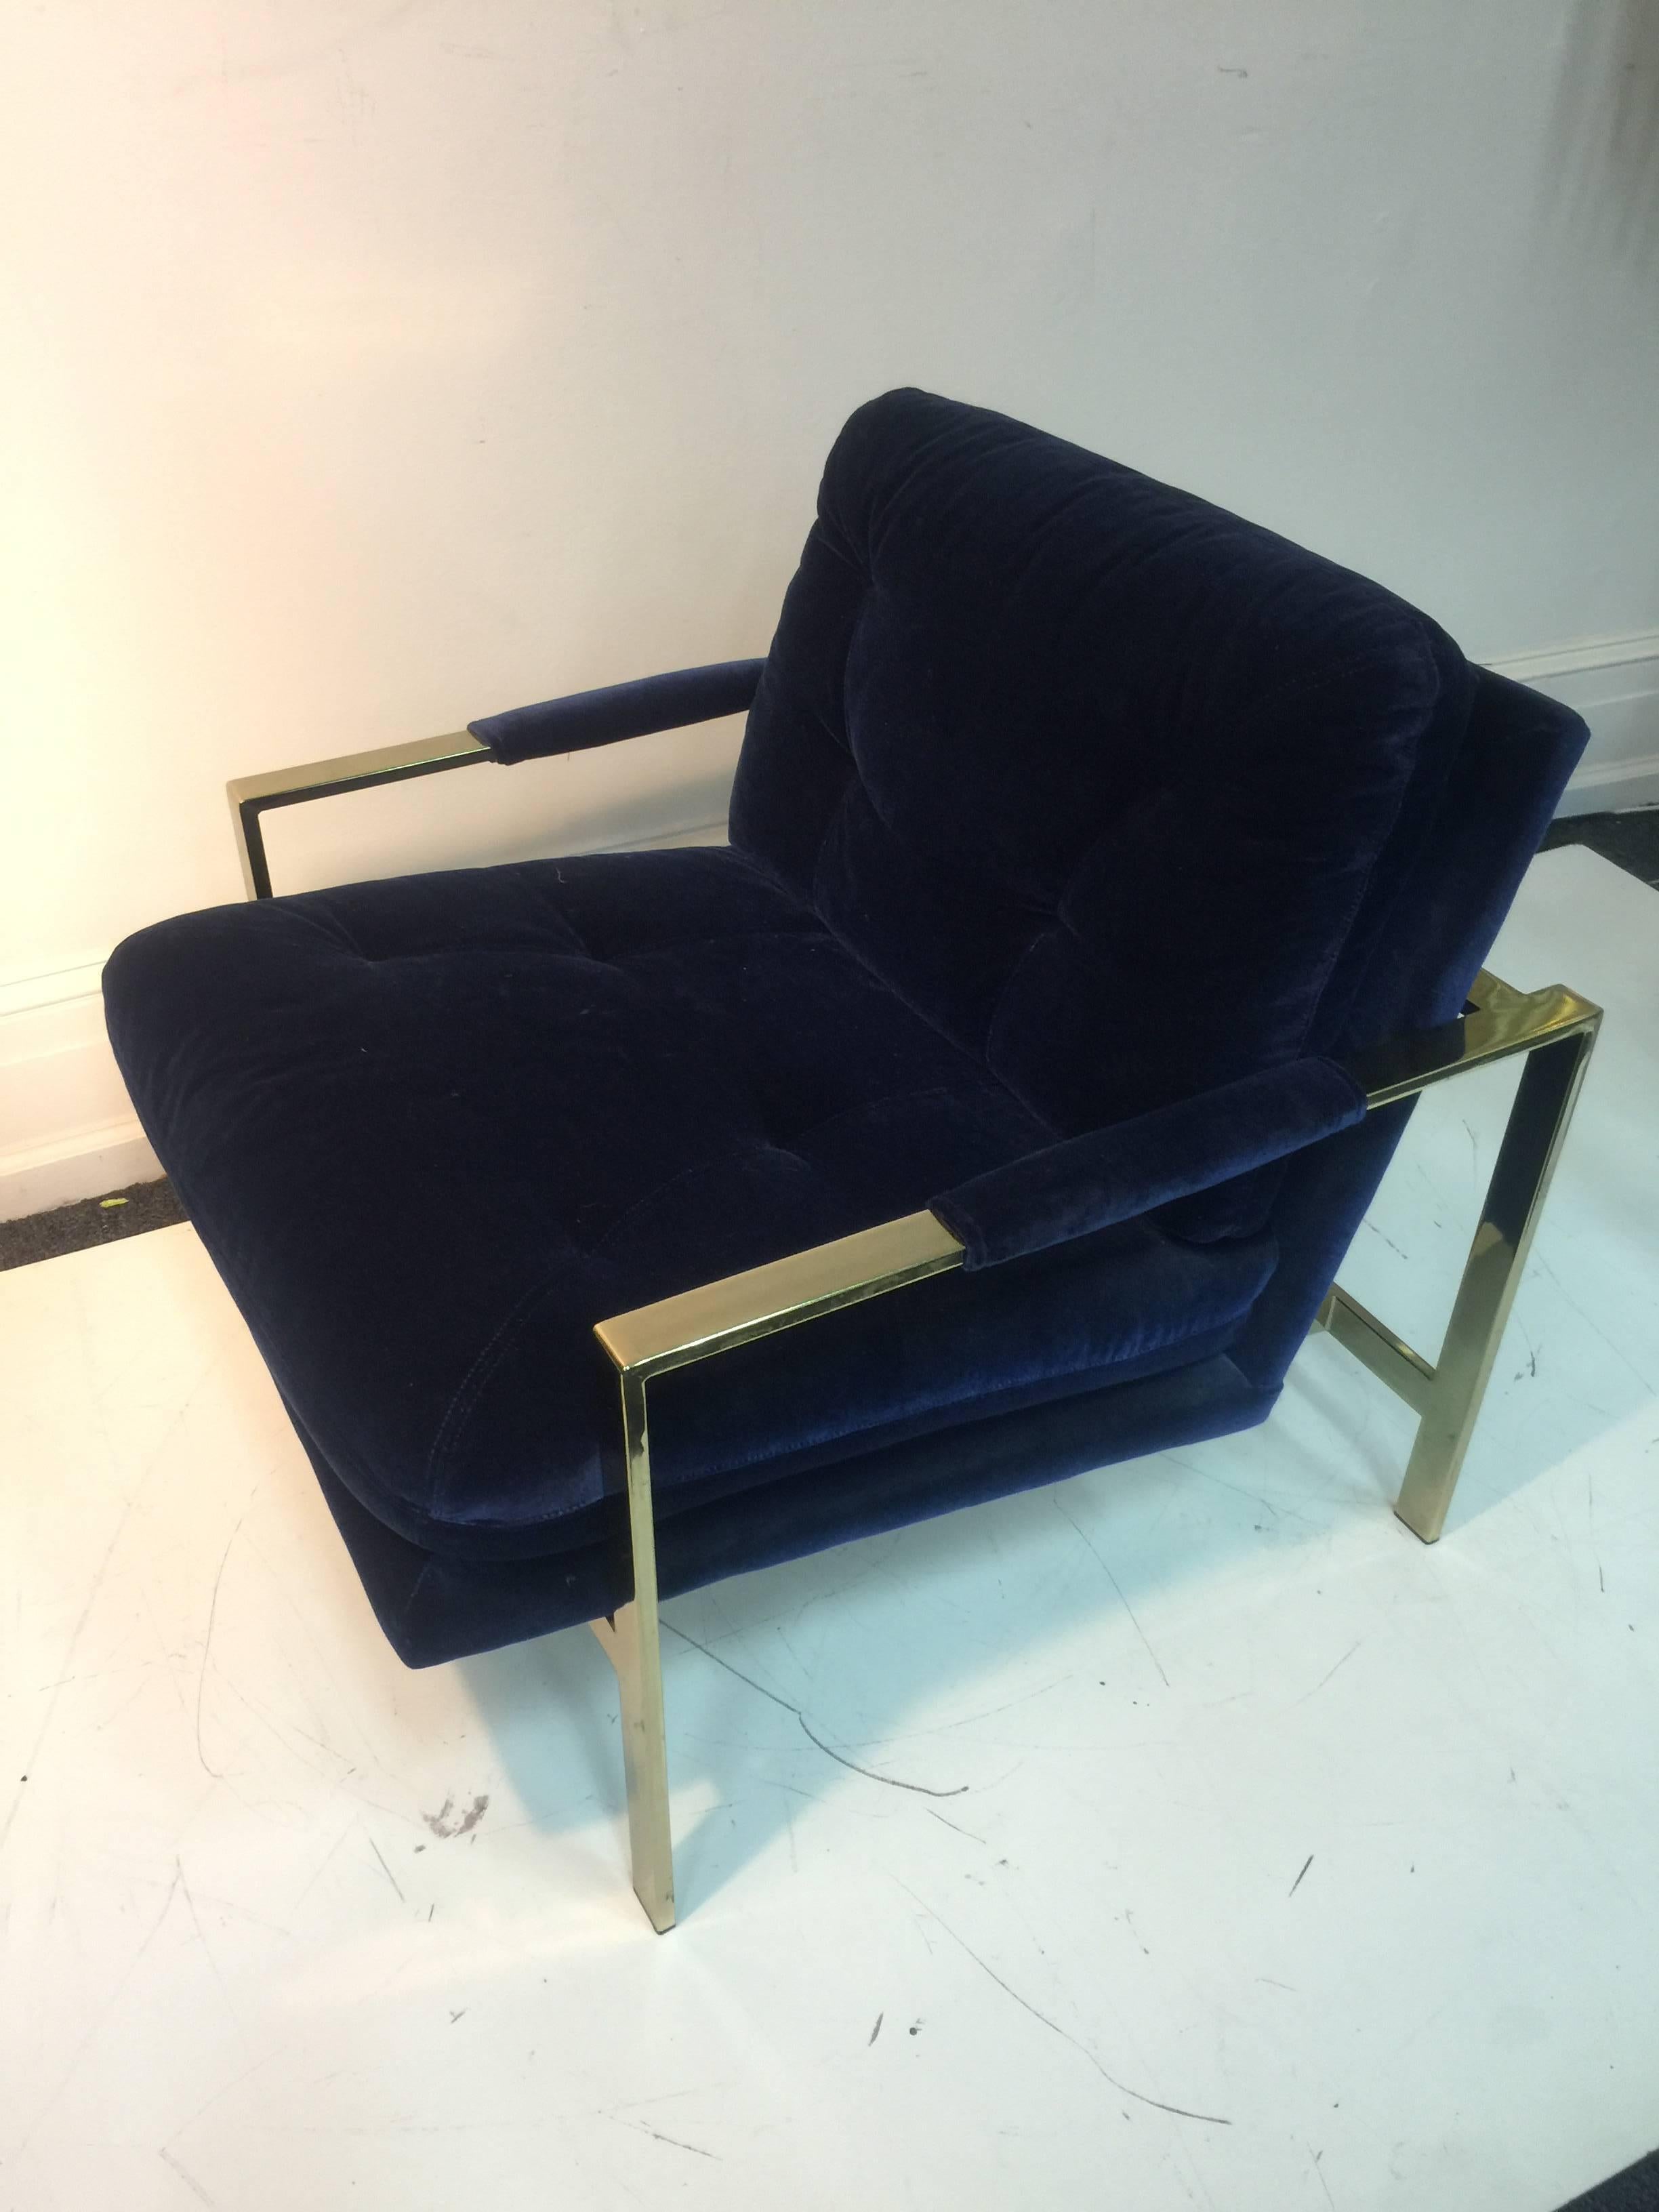 Luxurious Milo Baughman Lounge Chair Upholstered in Lush Blue Velvet In Good Condition For Sale In Mount Penn, PA